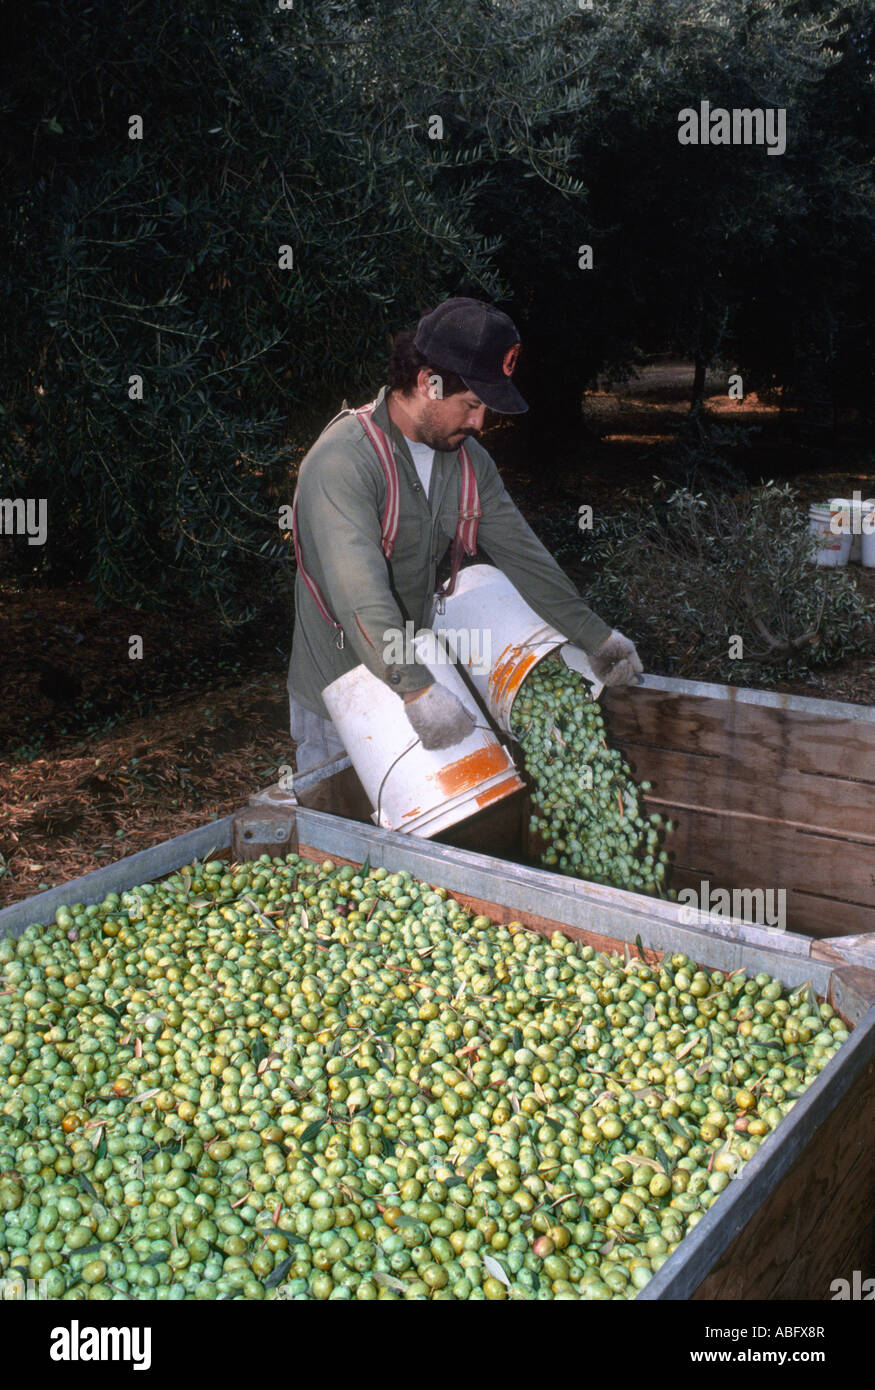 Worker empties bucket of fresh harvested California olives Stock Photo